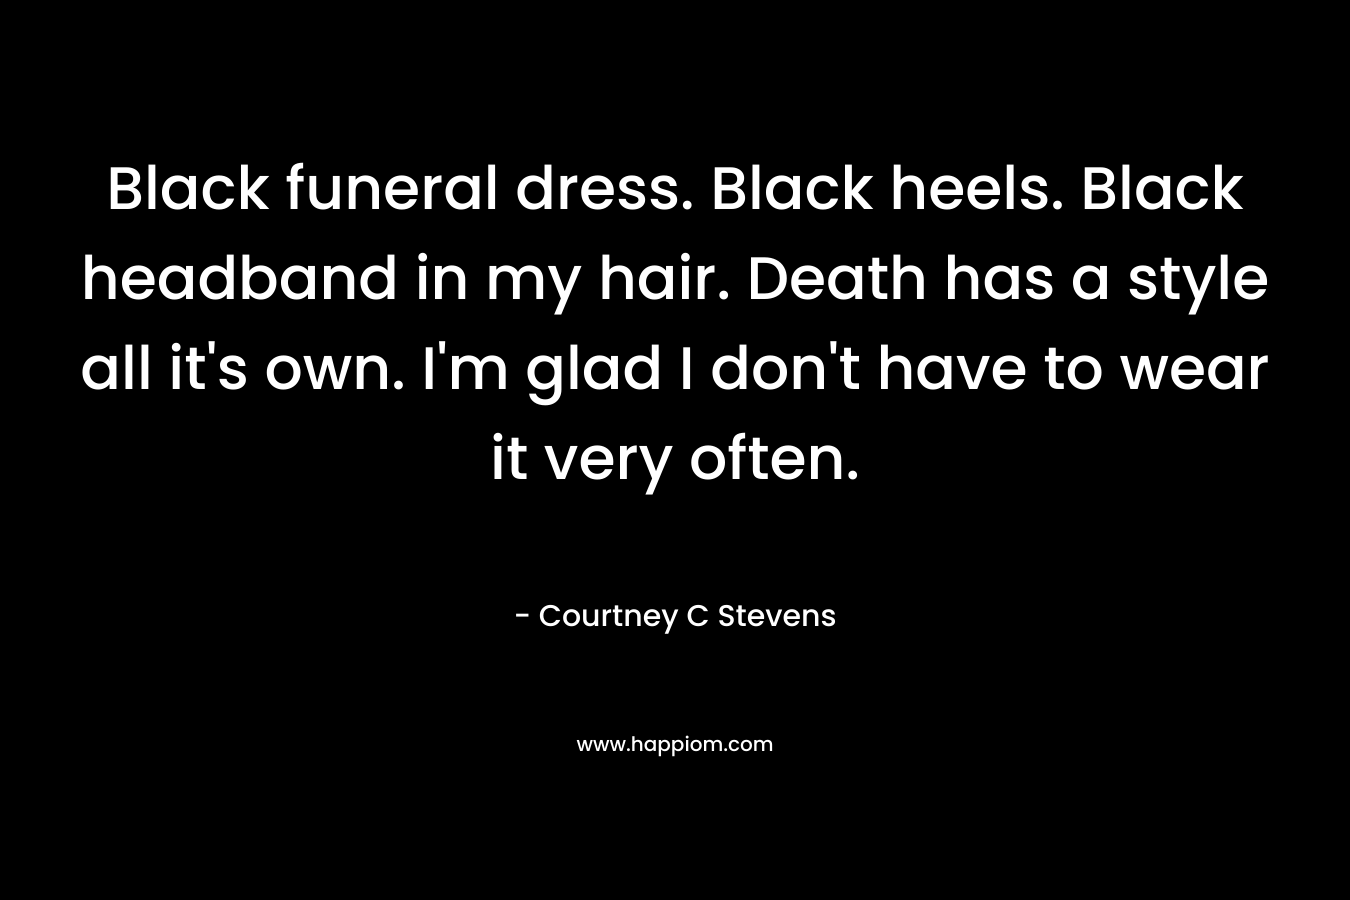 Black funeral dress. Black heels. Black headband in my hair. Death has a style all it's own. I'm glad I don't have to wear it very often.